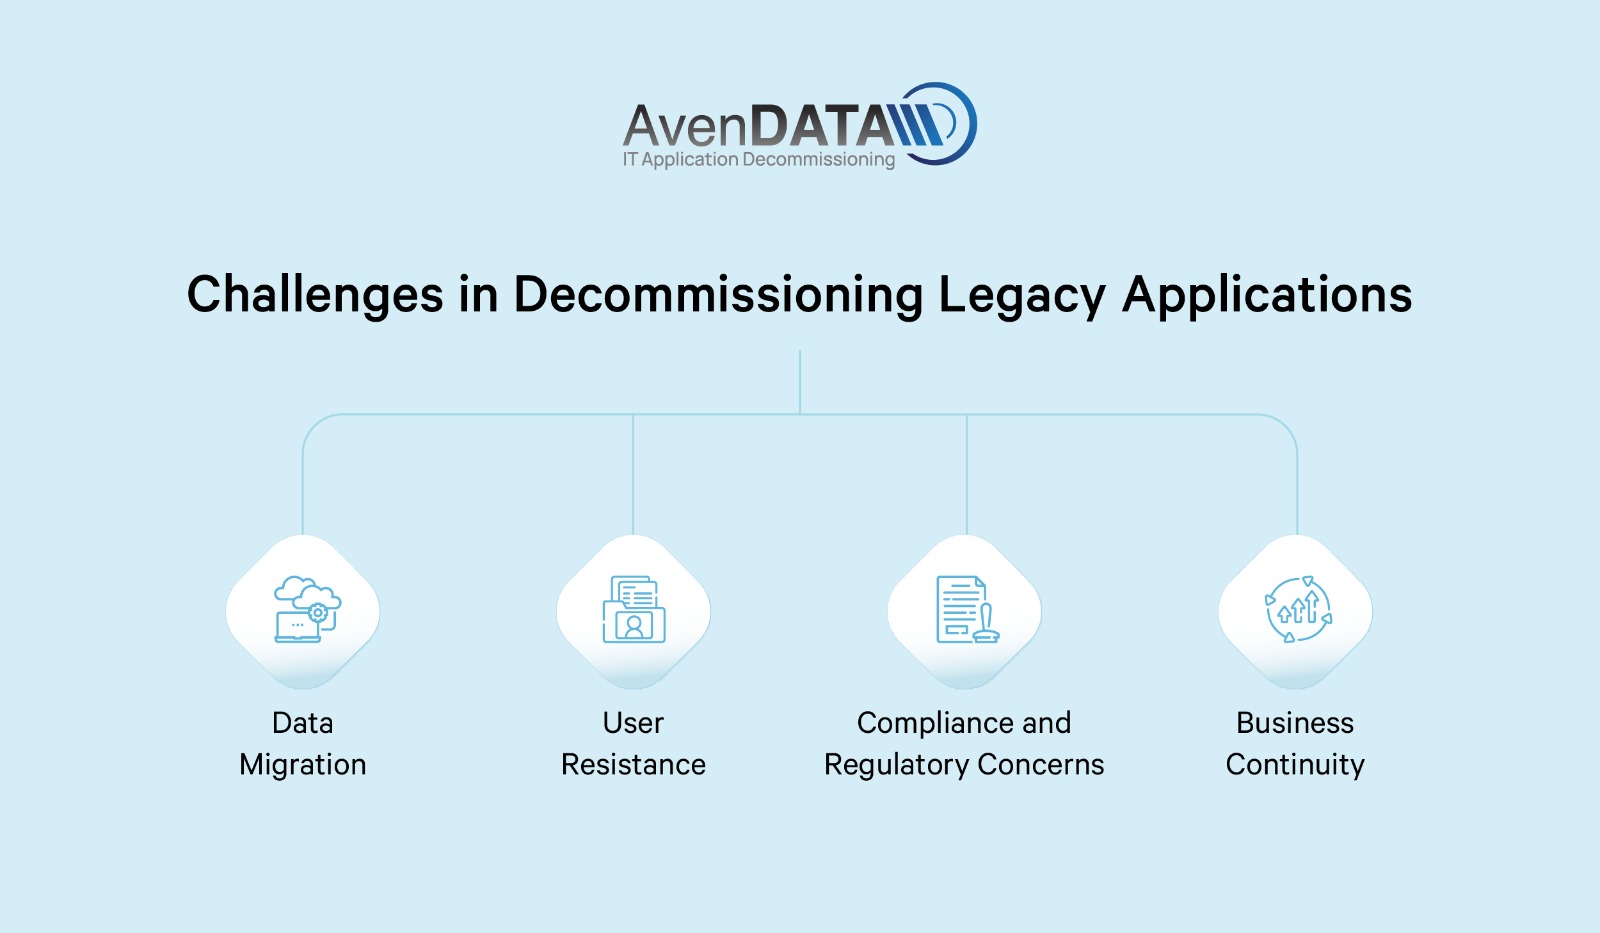 Challenges in Decommissioning Legacy Applications